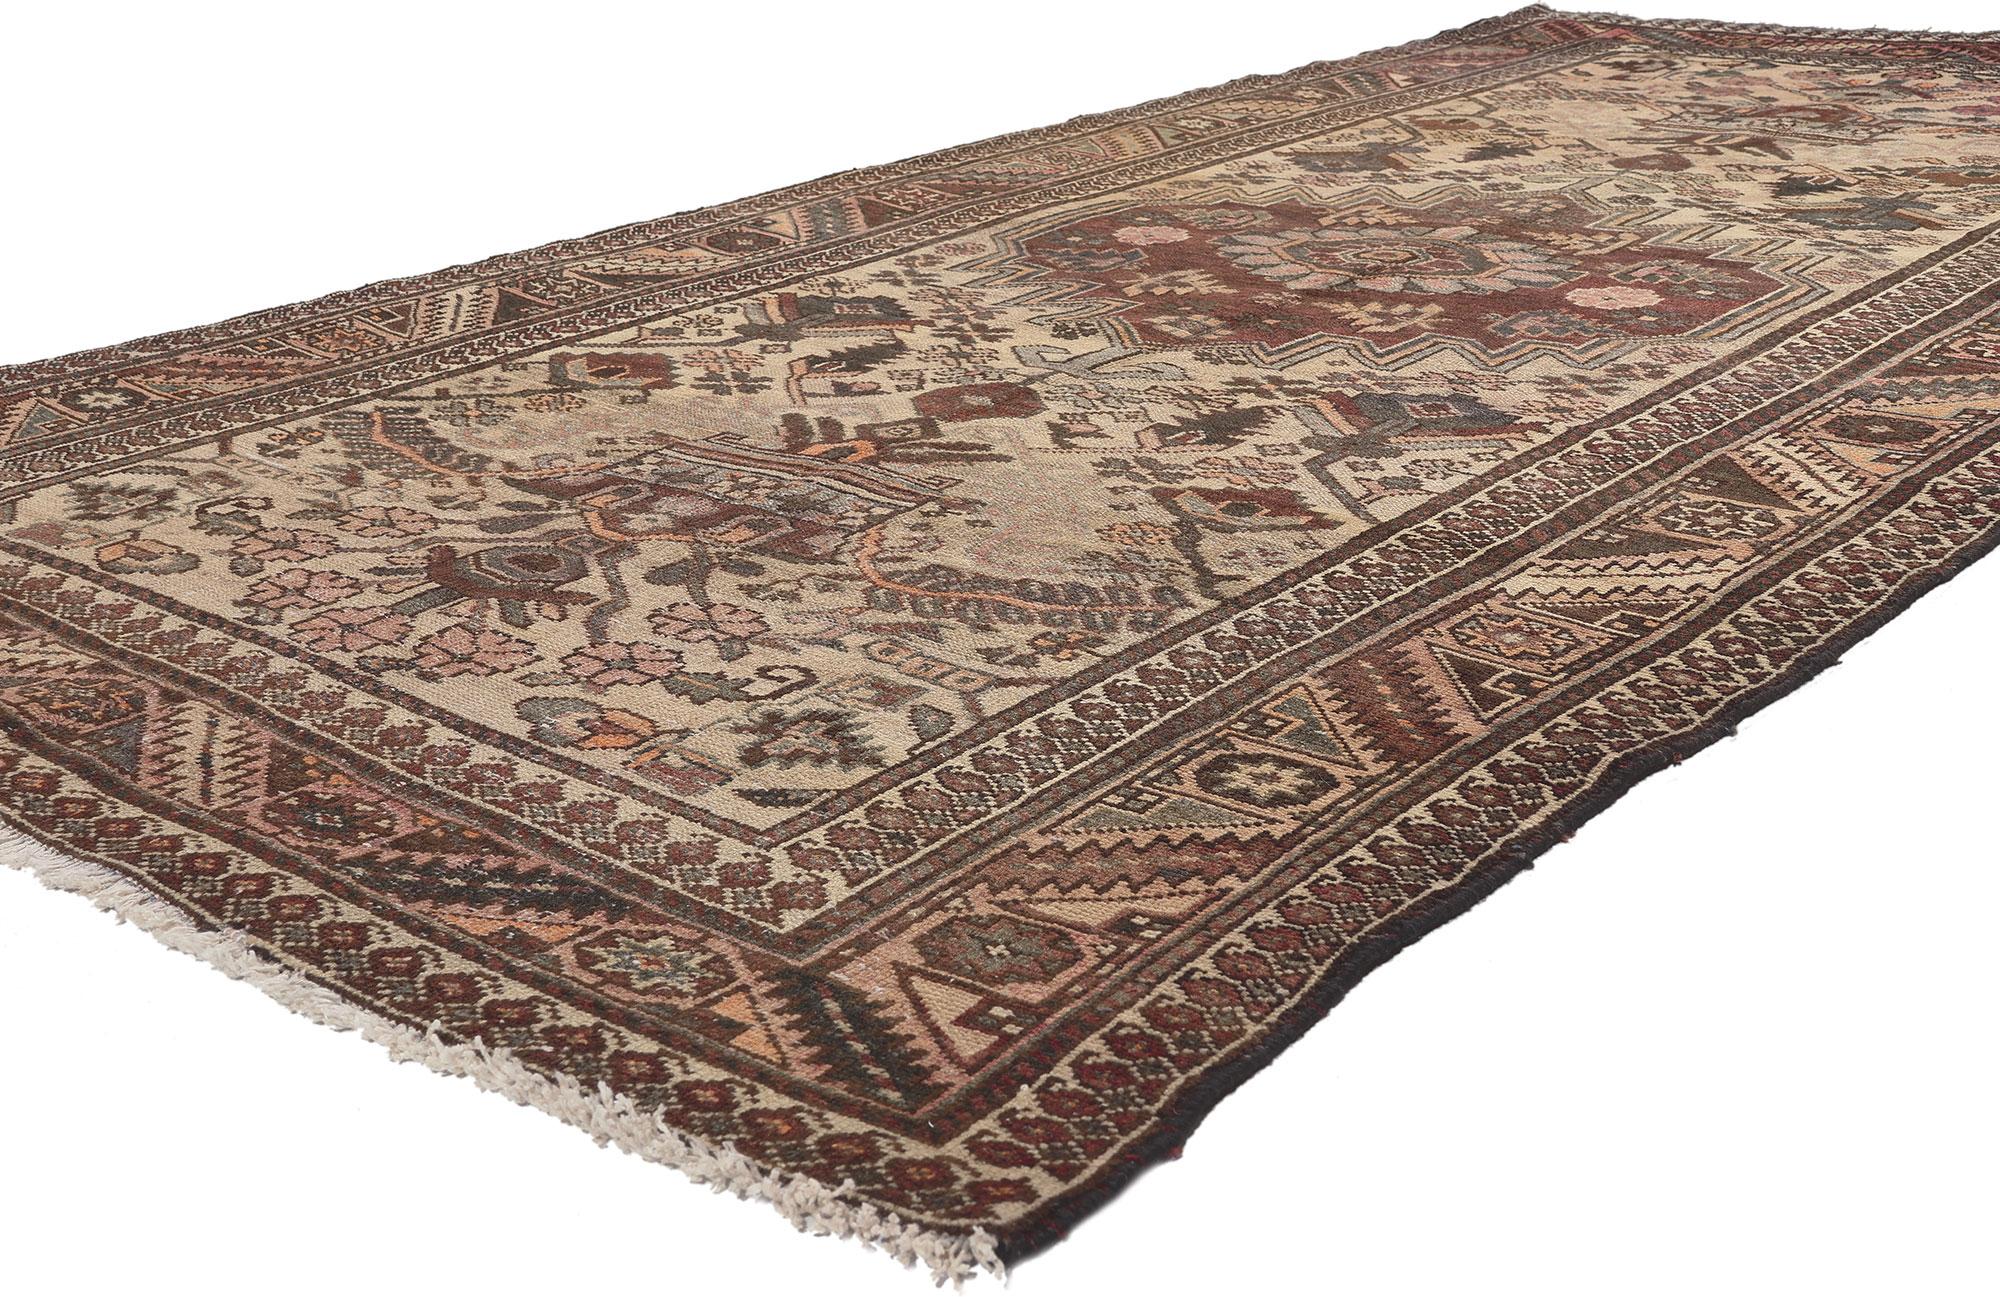 75259 Earth-Tone Vintage Persian Bakhtiari Rug, 05'00 X 10'04.
Subtle sophistication meets Biophilic Design in this vintage Persian Bakhtiari rug. The nature-inspired design and soft earthy hues woven into this piece work together creating a modern